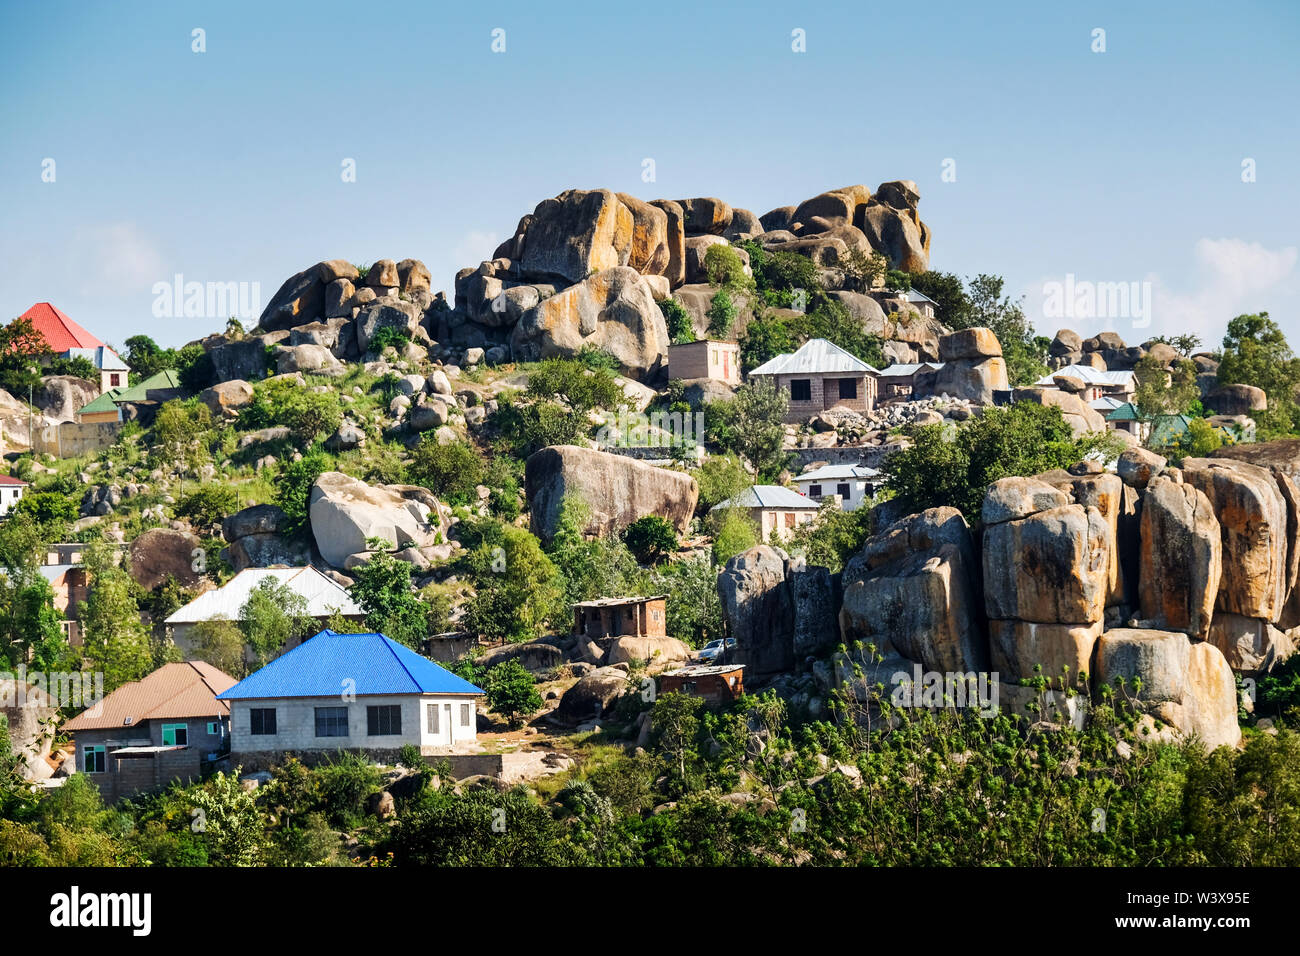 typical rock formations in the suburbs of the city of Mwanza near Lake Victoria, Tanzania, Africa Stock Photo